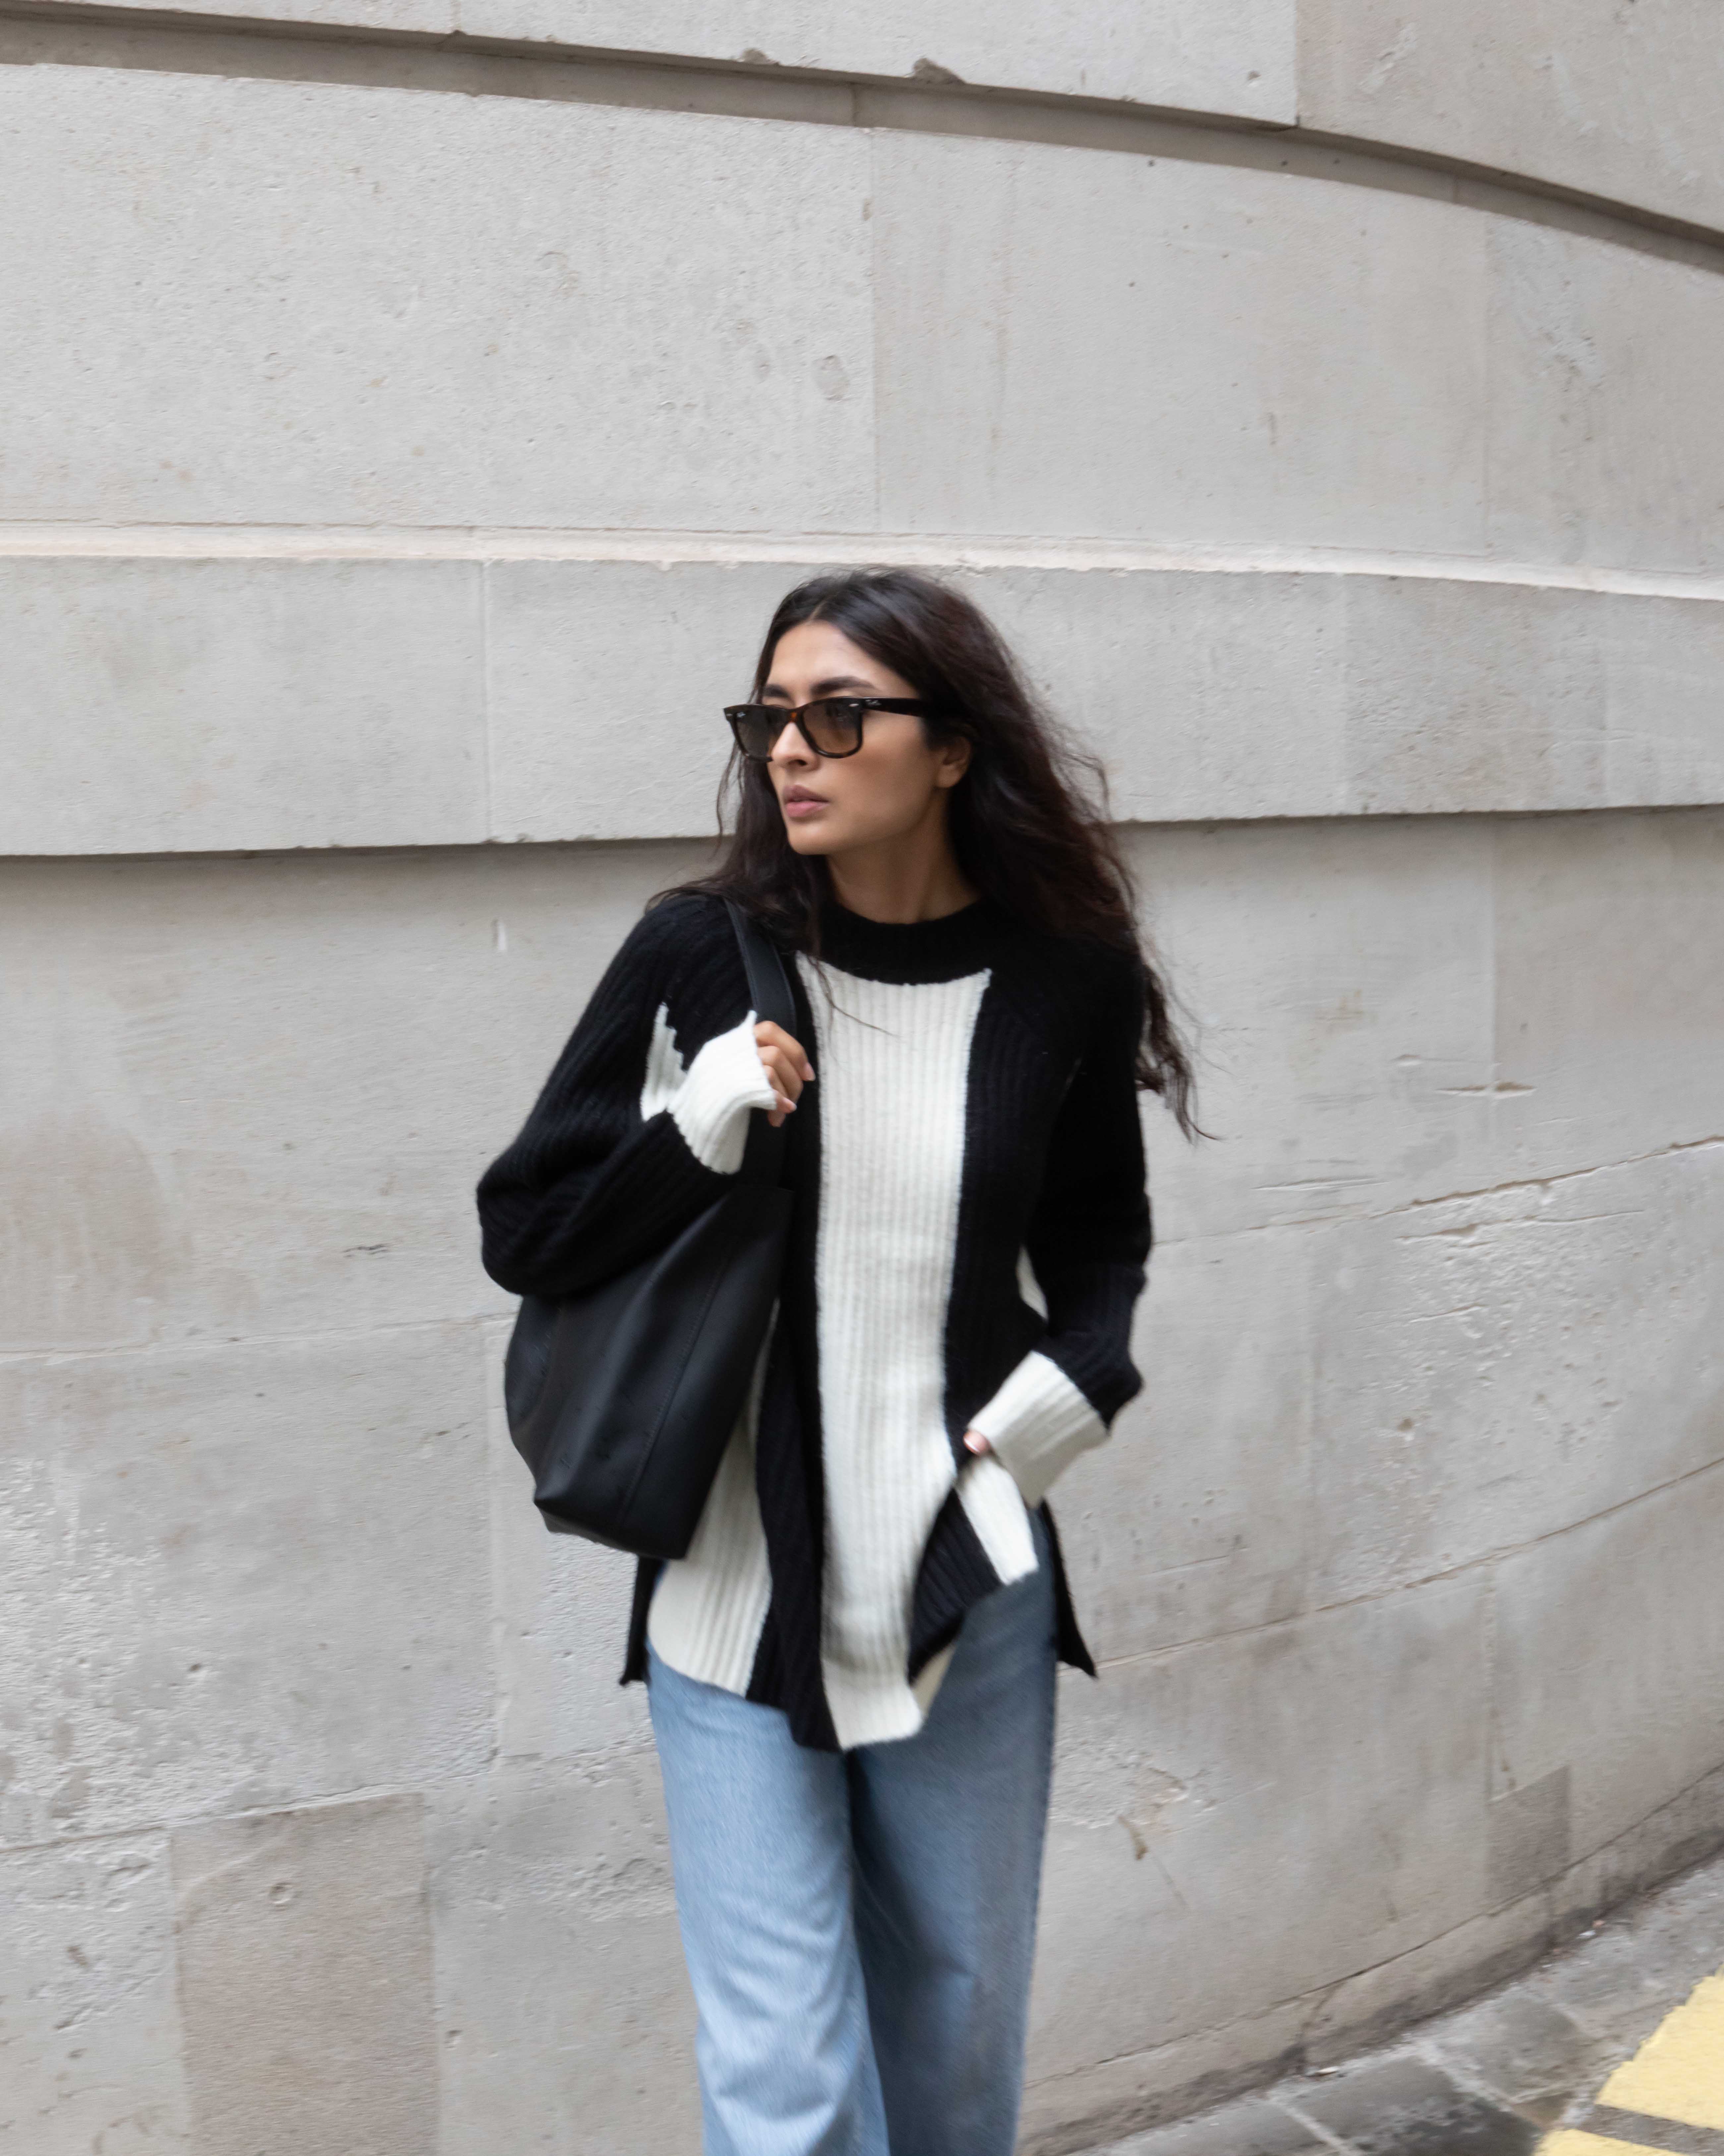 Influencer Yatri wears Marks & Spencer's block-stripe jumper with blue jeans and a black leather bag